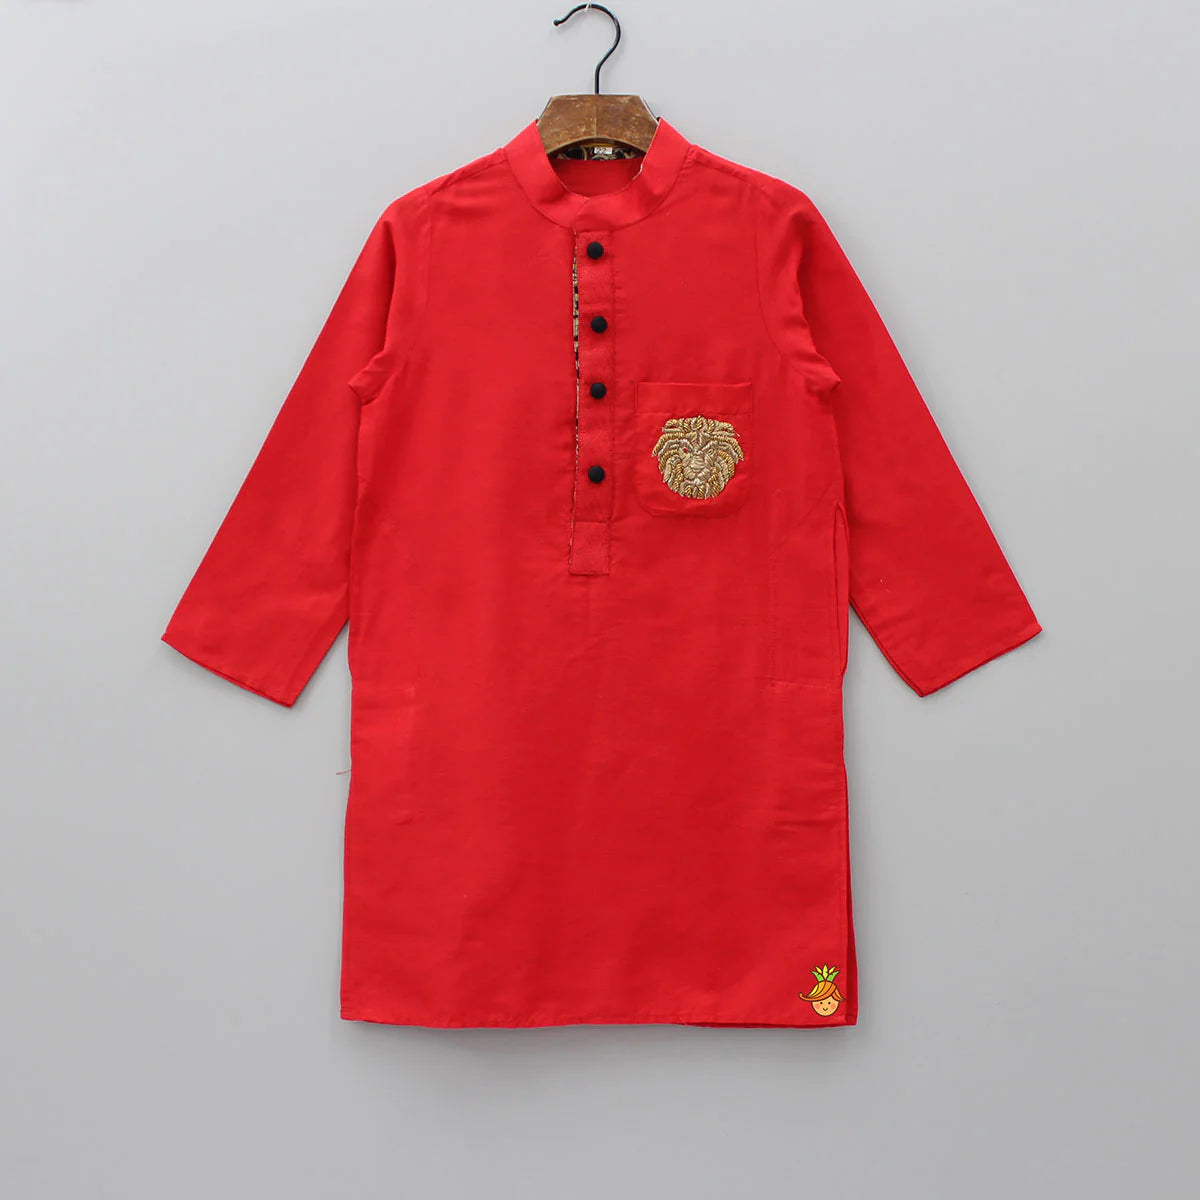 Pre Order: Red Kurta With Embroidery Patch